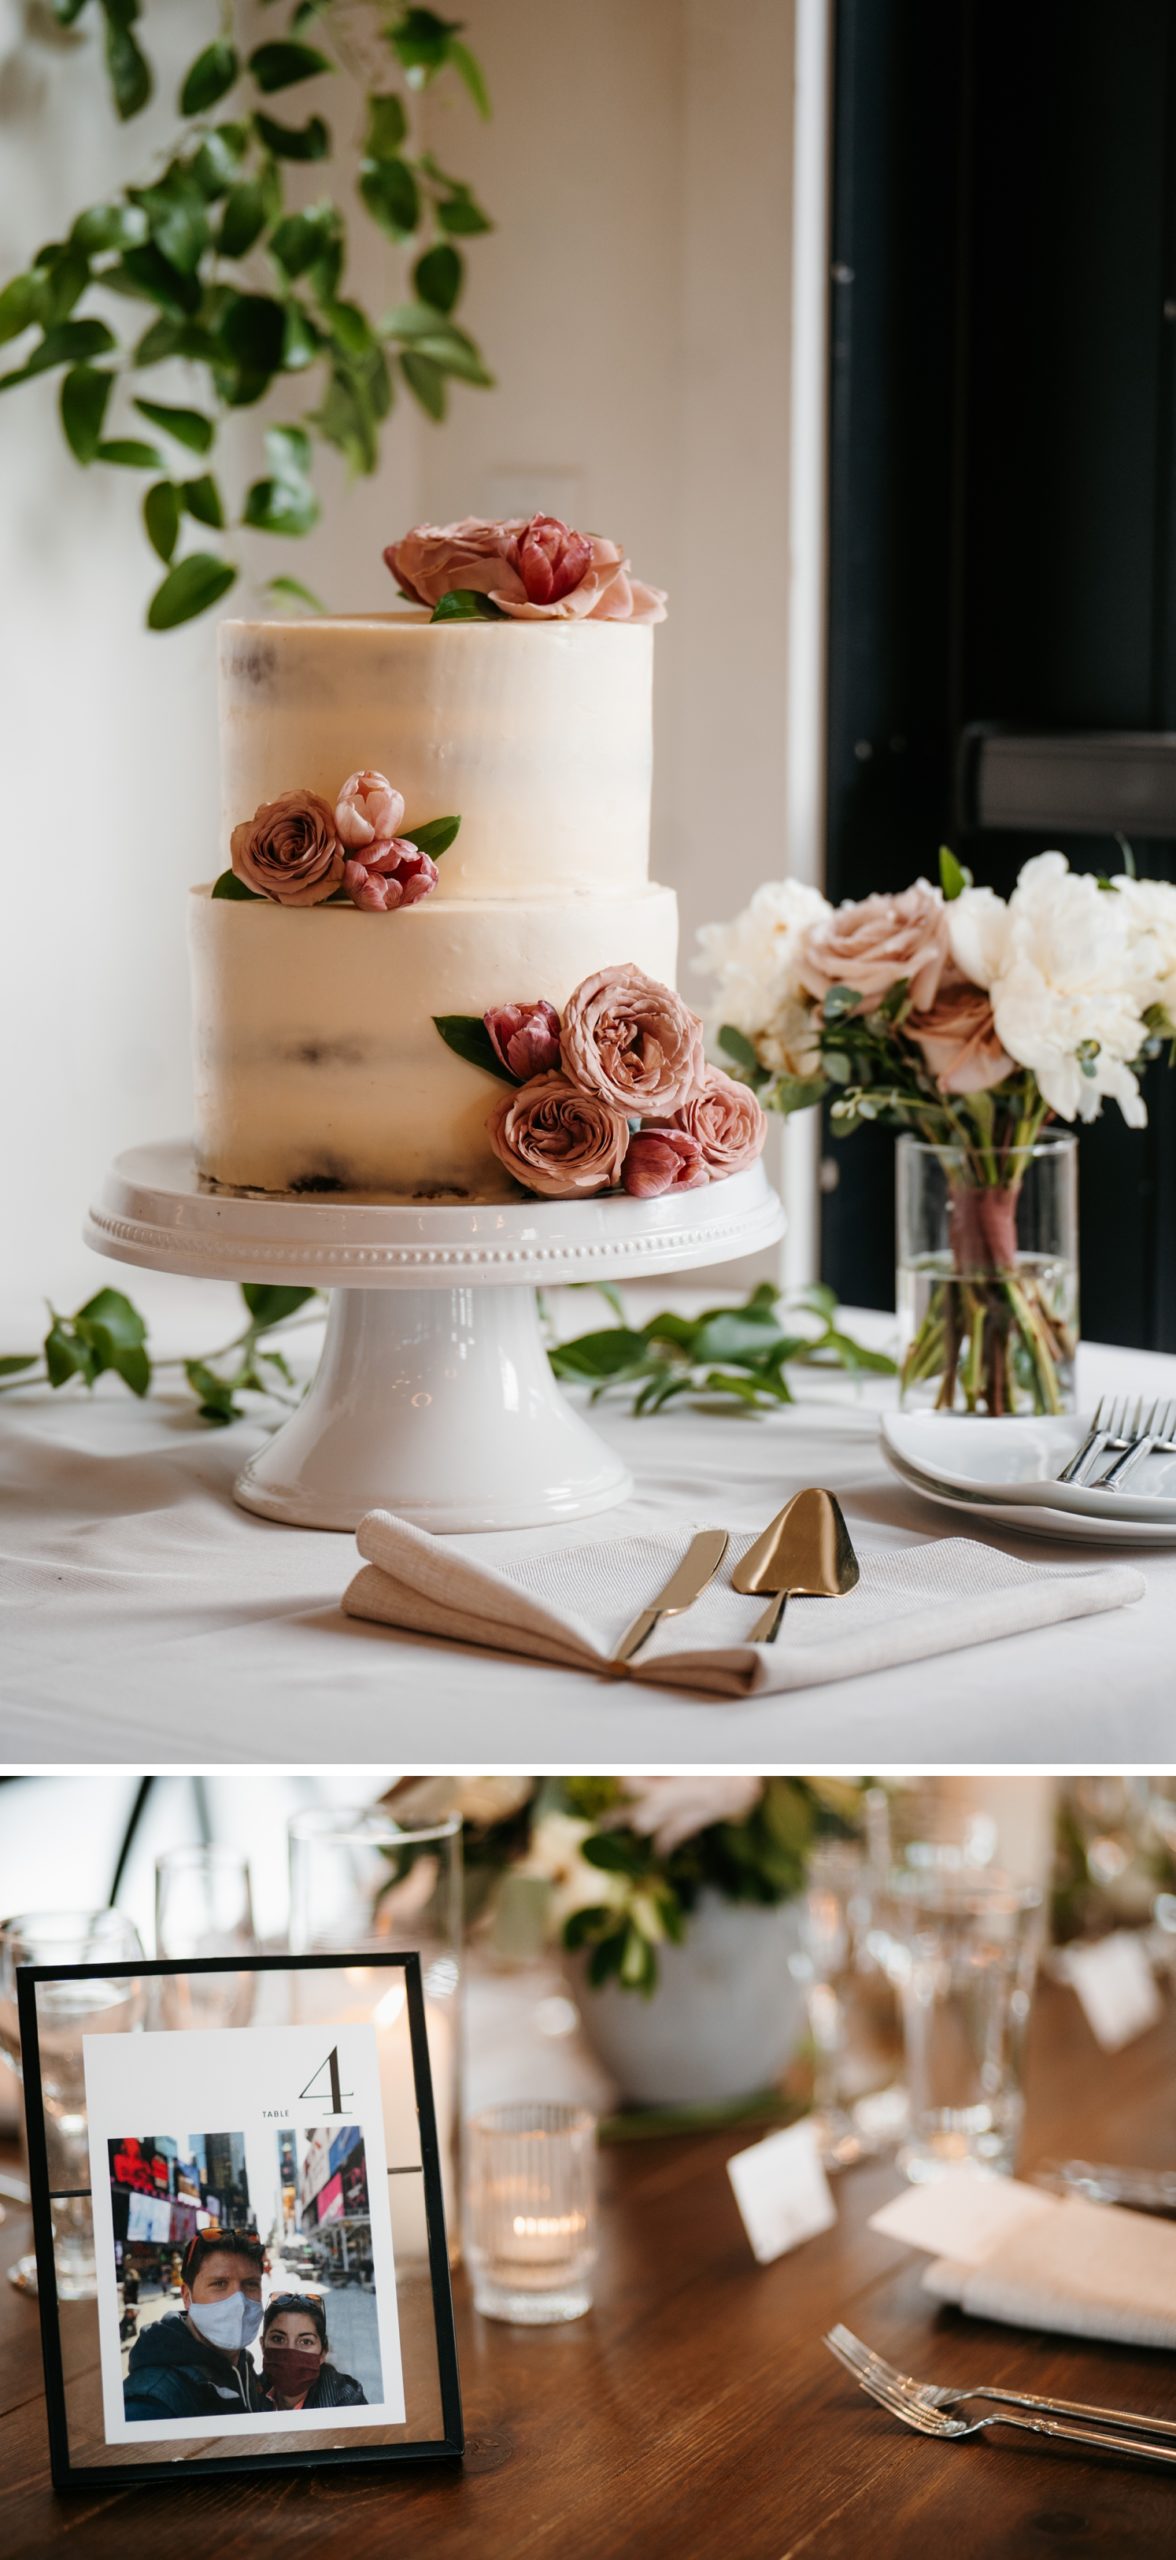 Pink ranunculus on two tier wedding cake | couple's picture as table numbers at wedding reception | McArthur Weddings and Events